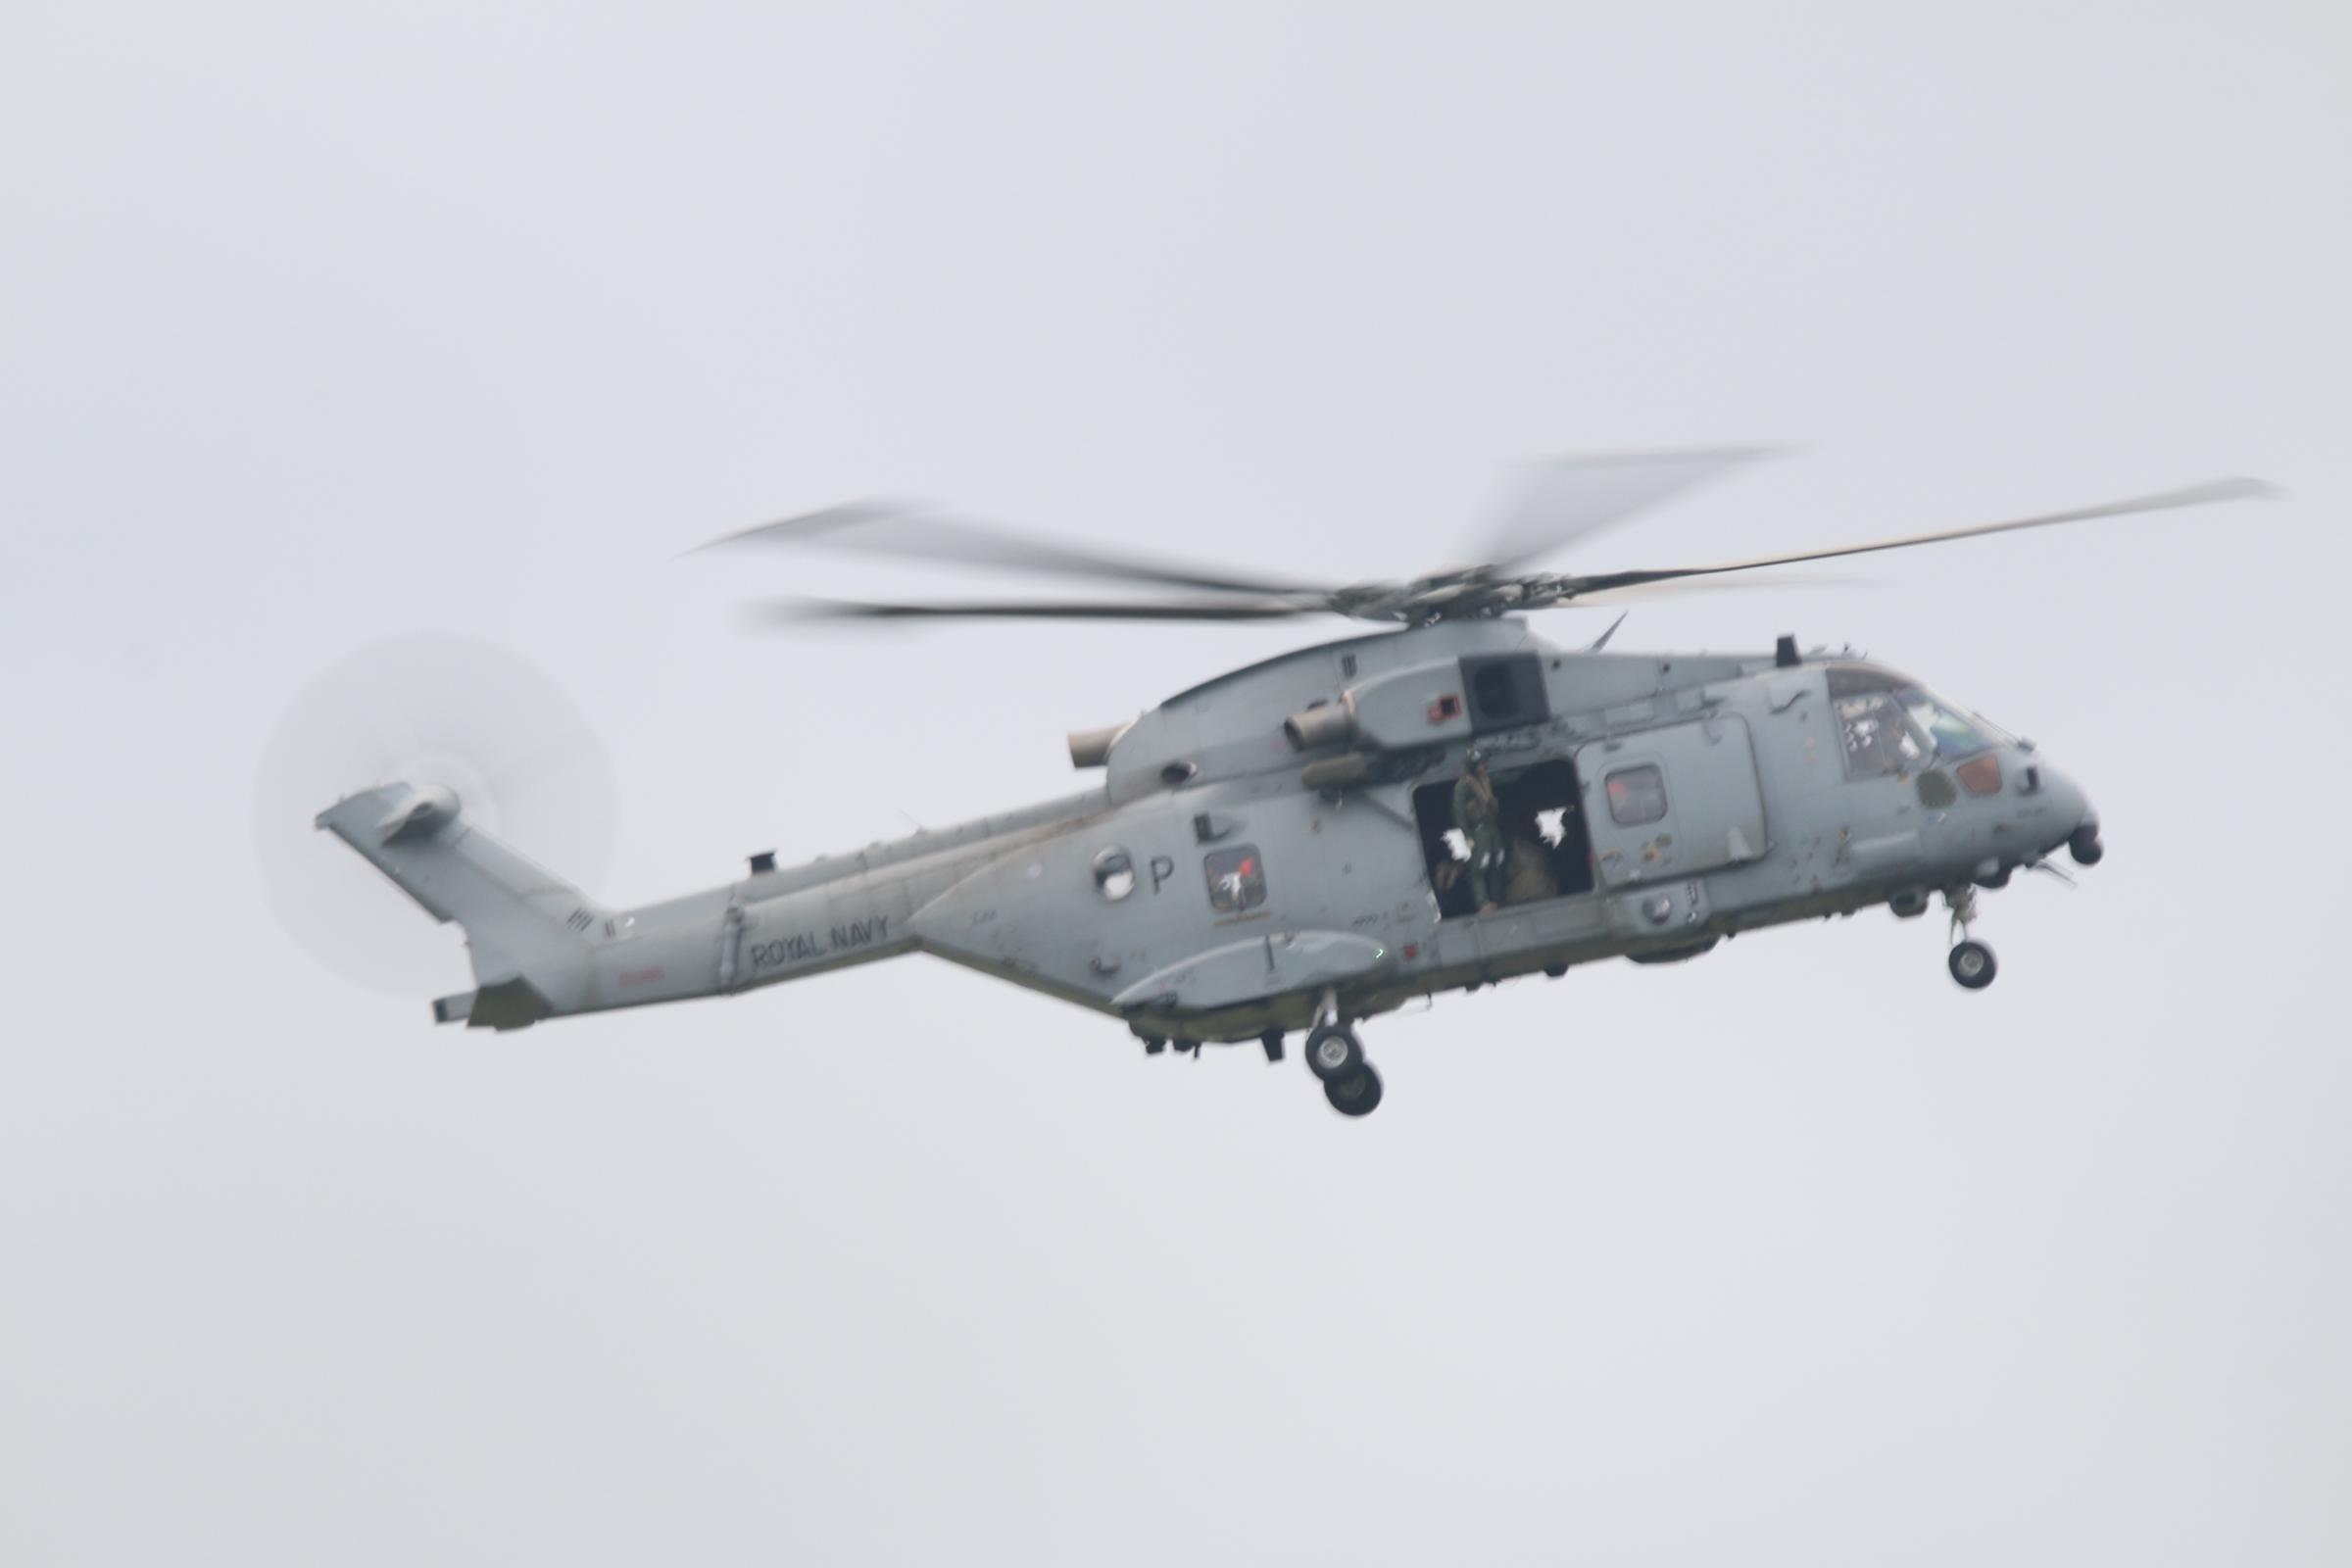 A Merlin Helicopter from HMS Queen Elizabeth flying over North Yorkshire Picture: PHILIP SEDGWICK